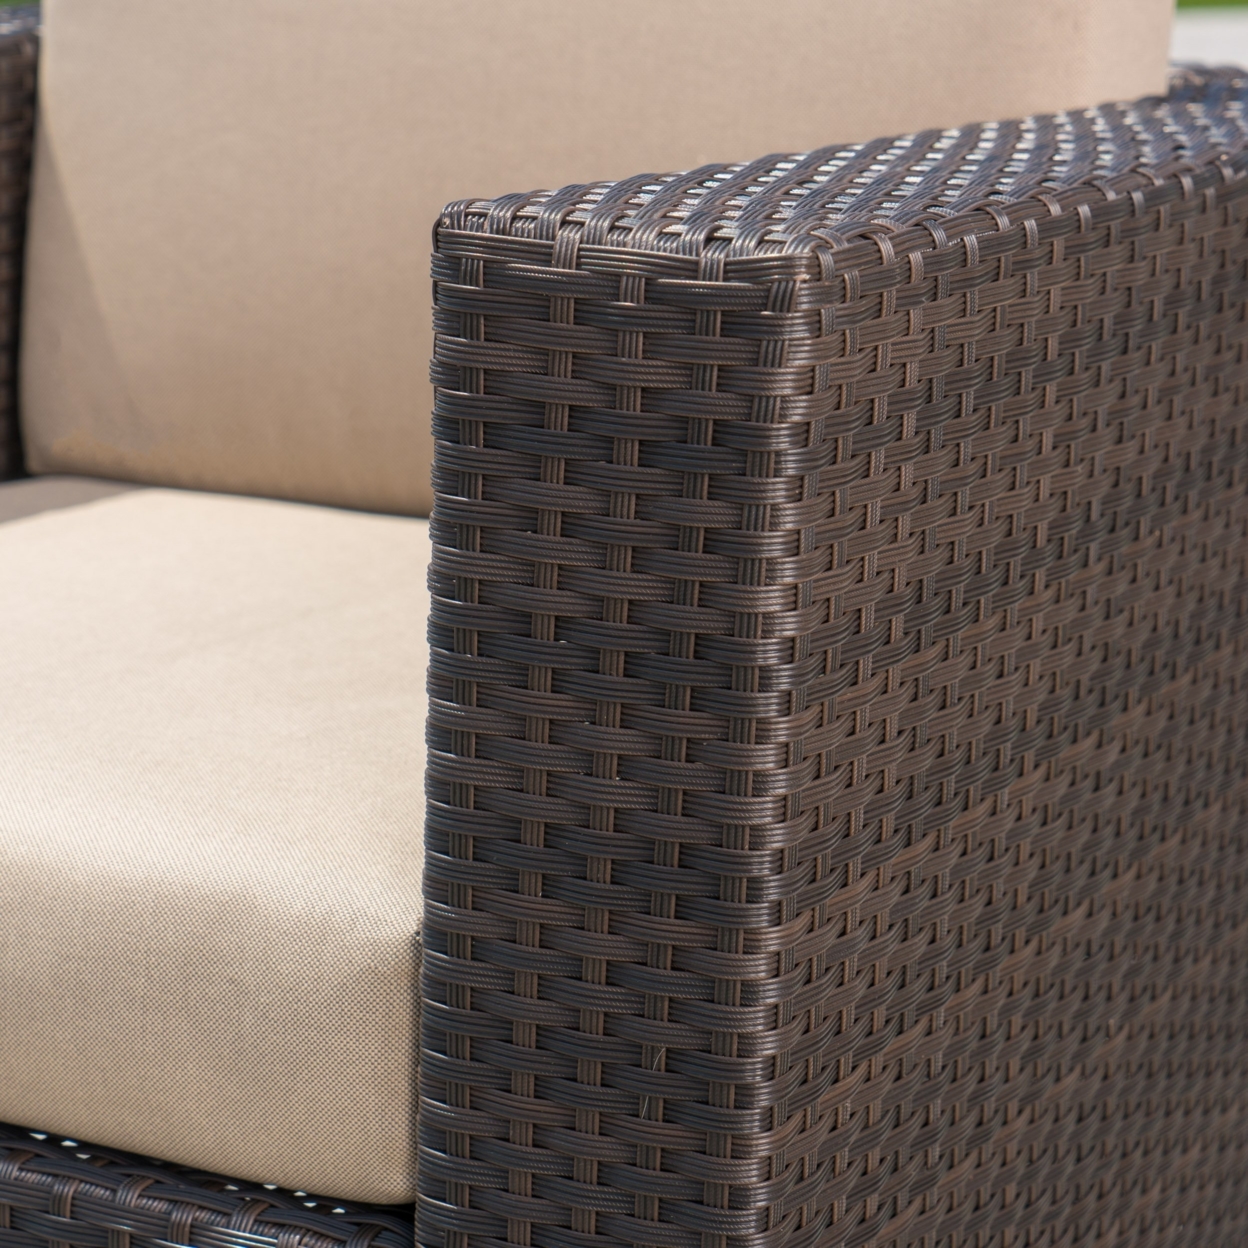 Venice Outdoor Wicker Swivel Club Chair With Water Resistant Cushions - Light Brown/ceramic Gray, Single